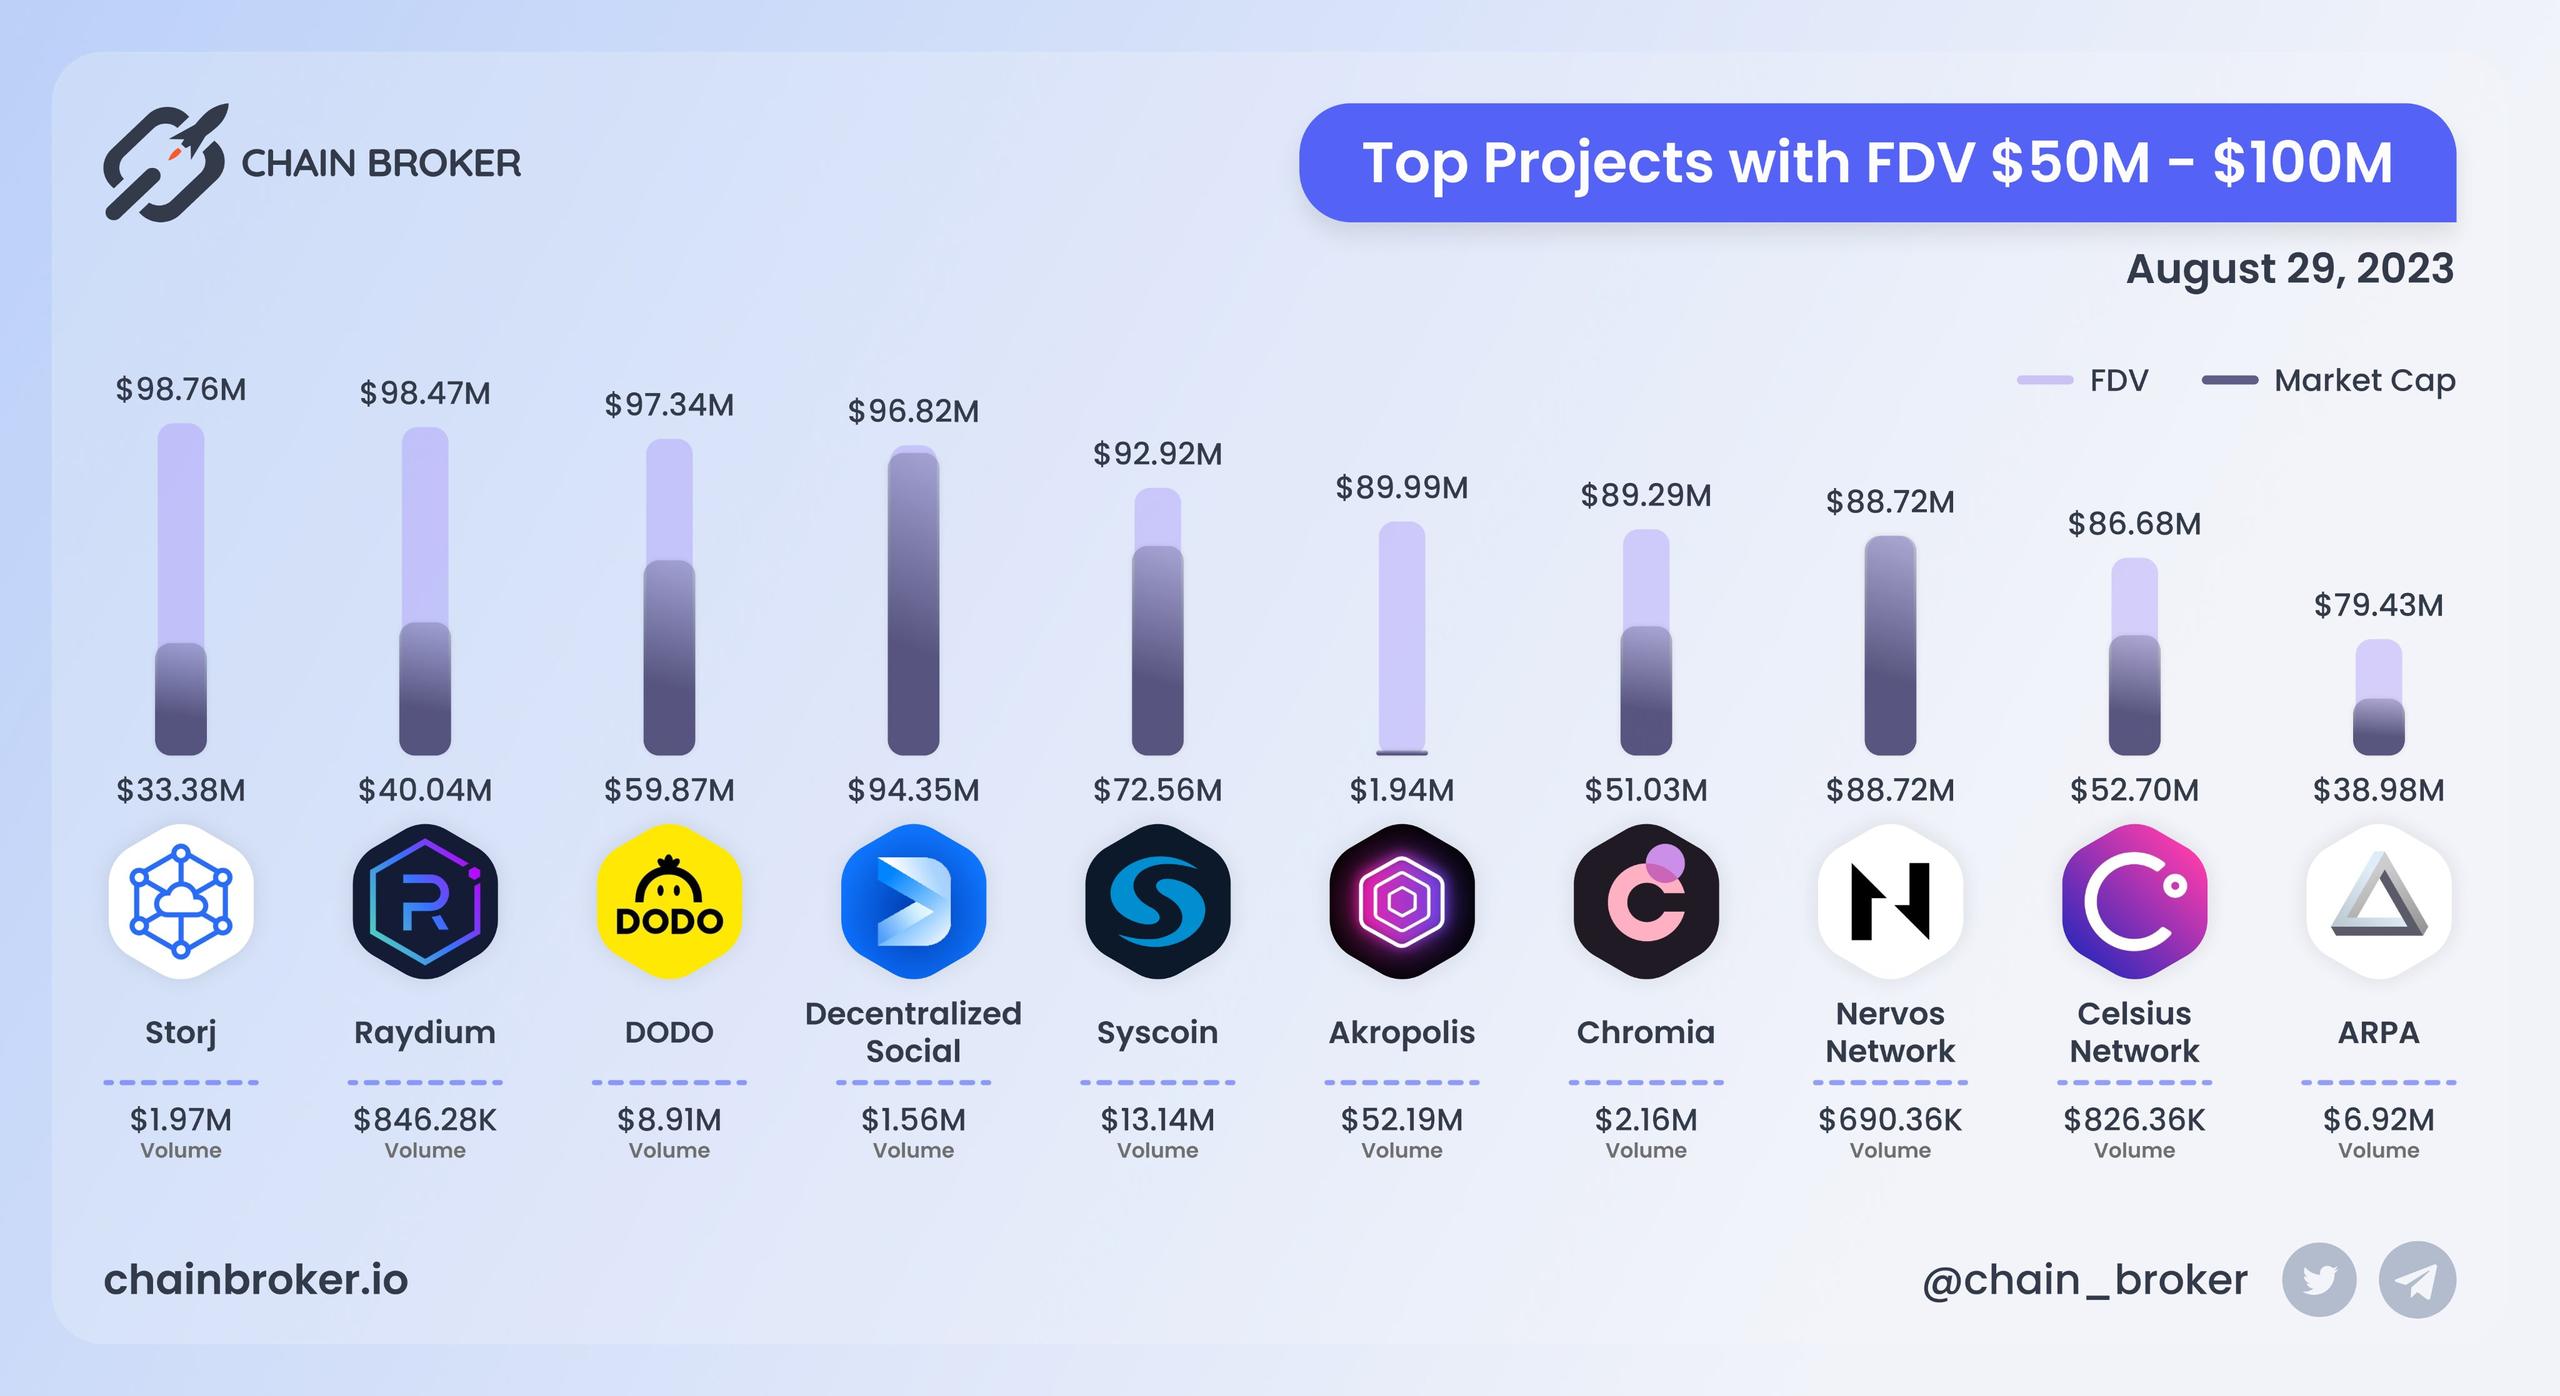 Top projects with FDV $50M - $100M